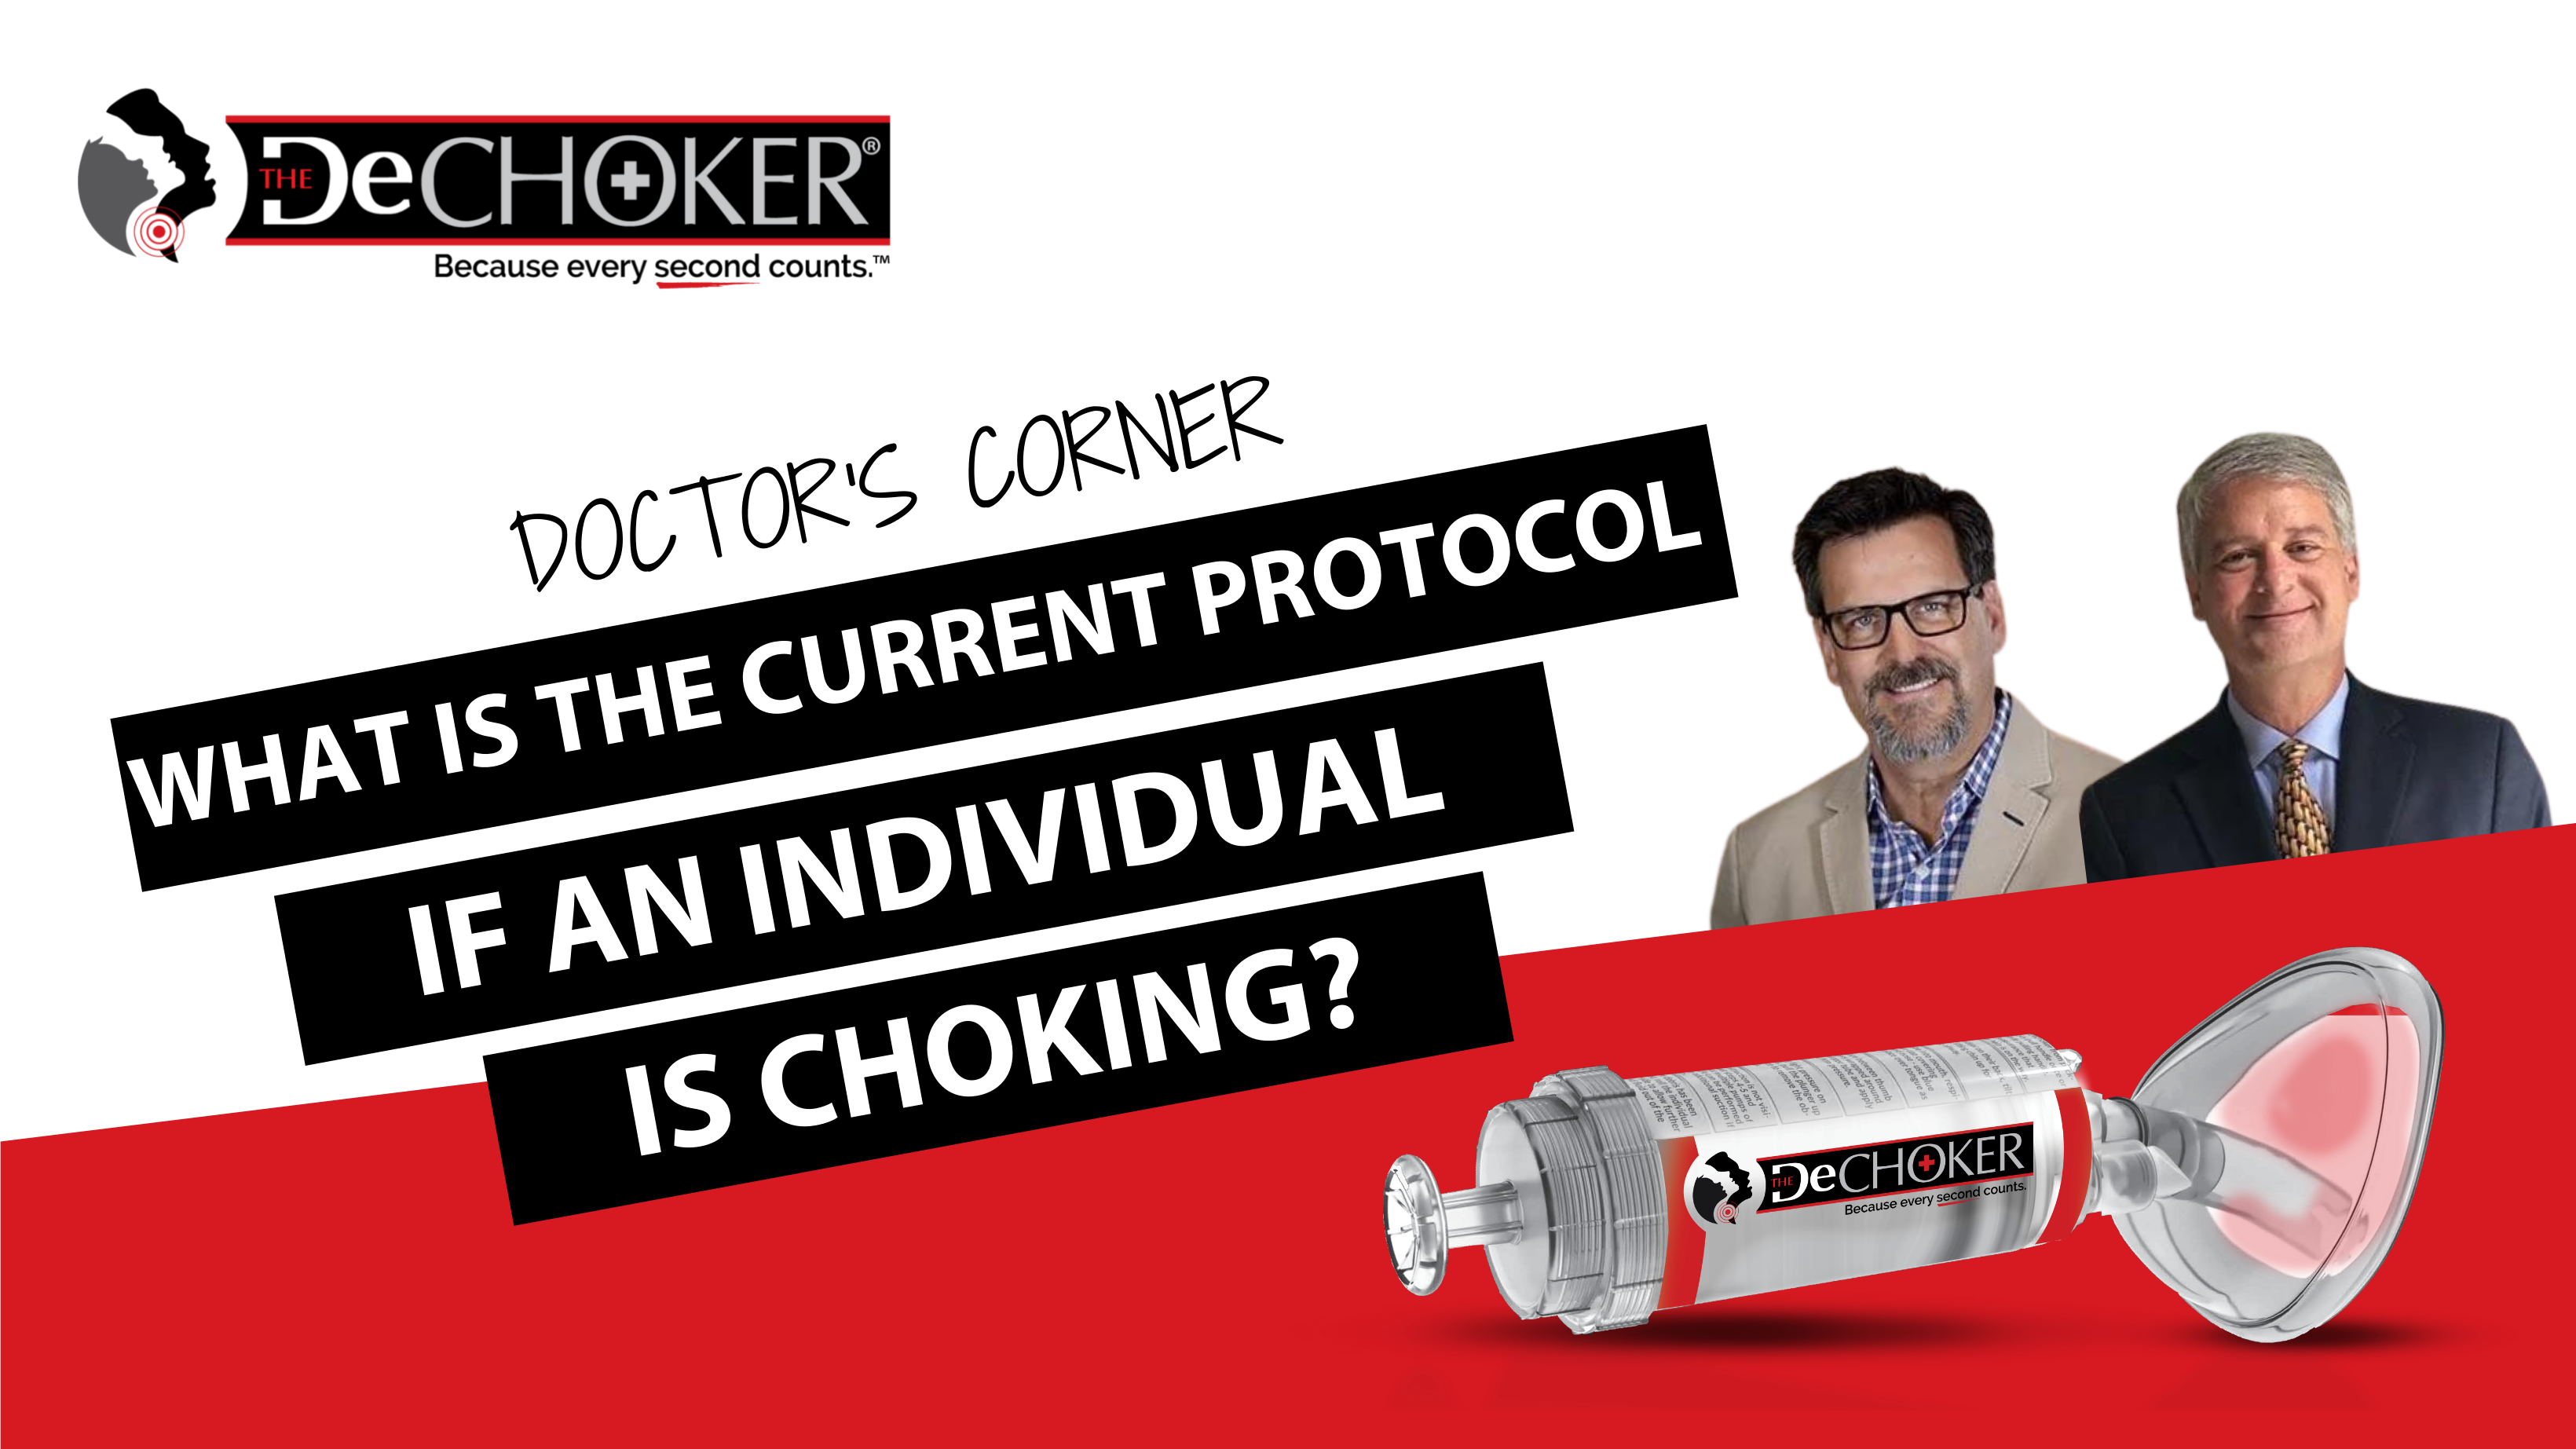 What is the current protocol if an individual is choking?